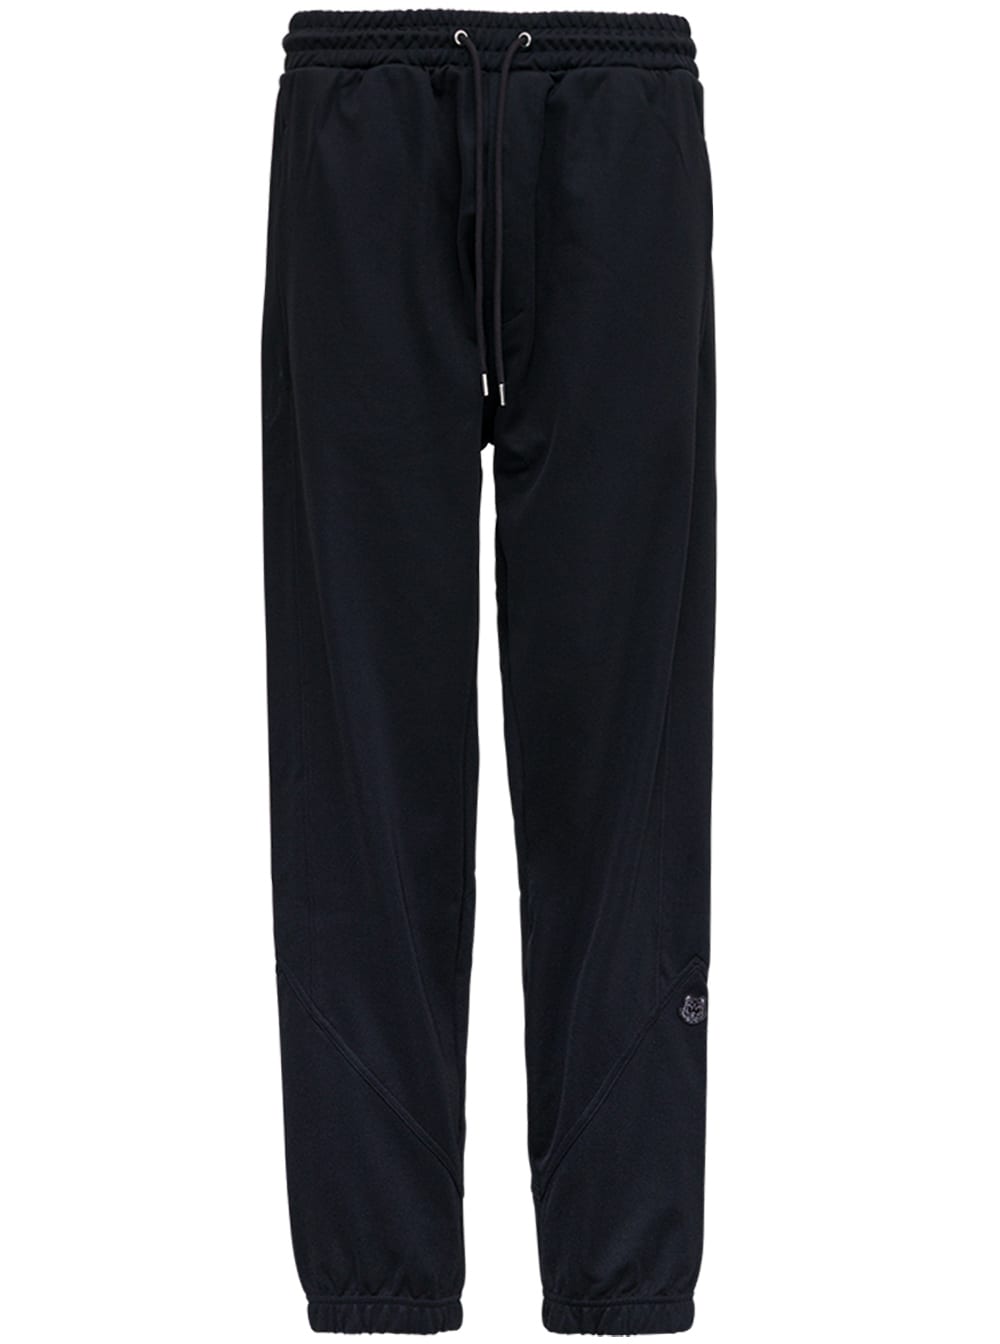 Kenzo Black Cotton Blend Joggers With Logo Patch